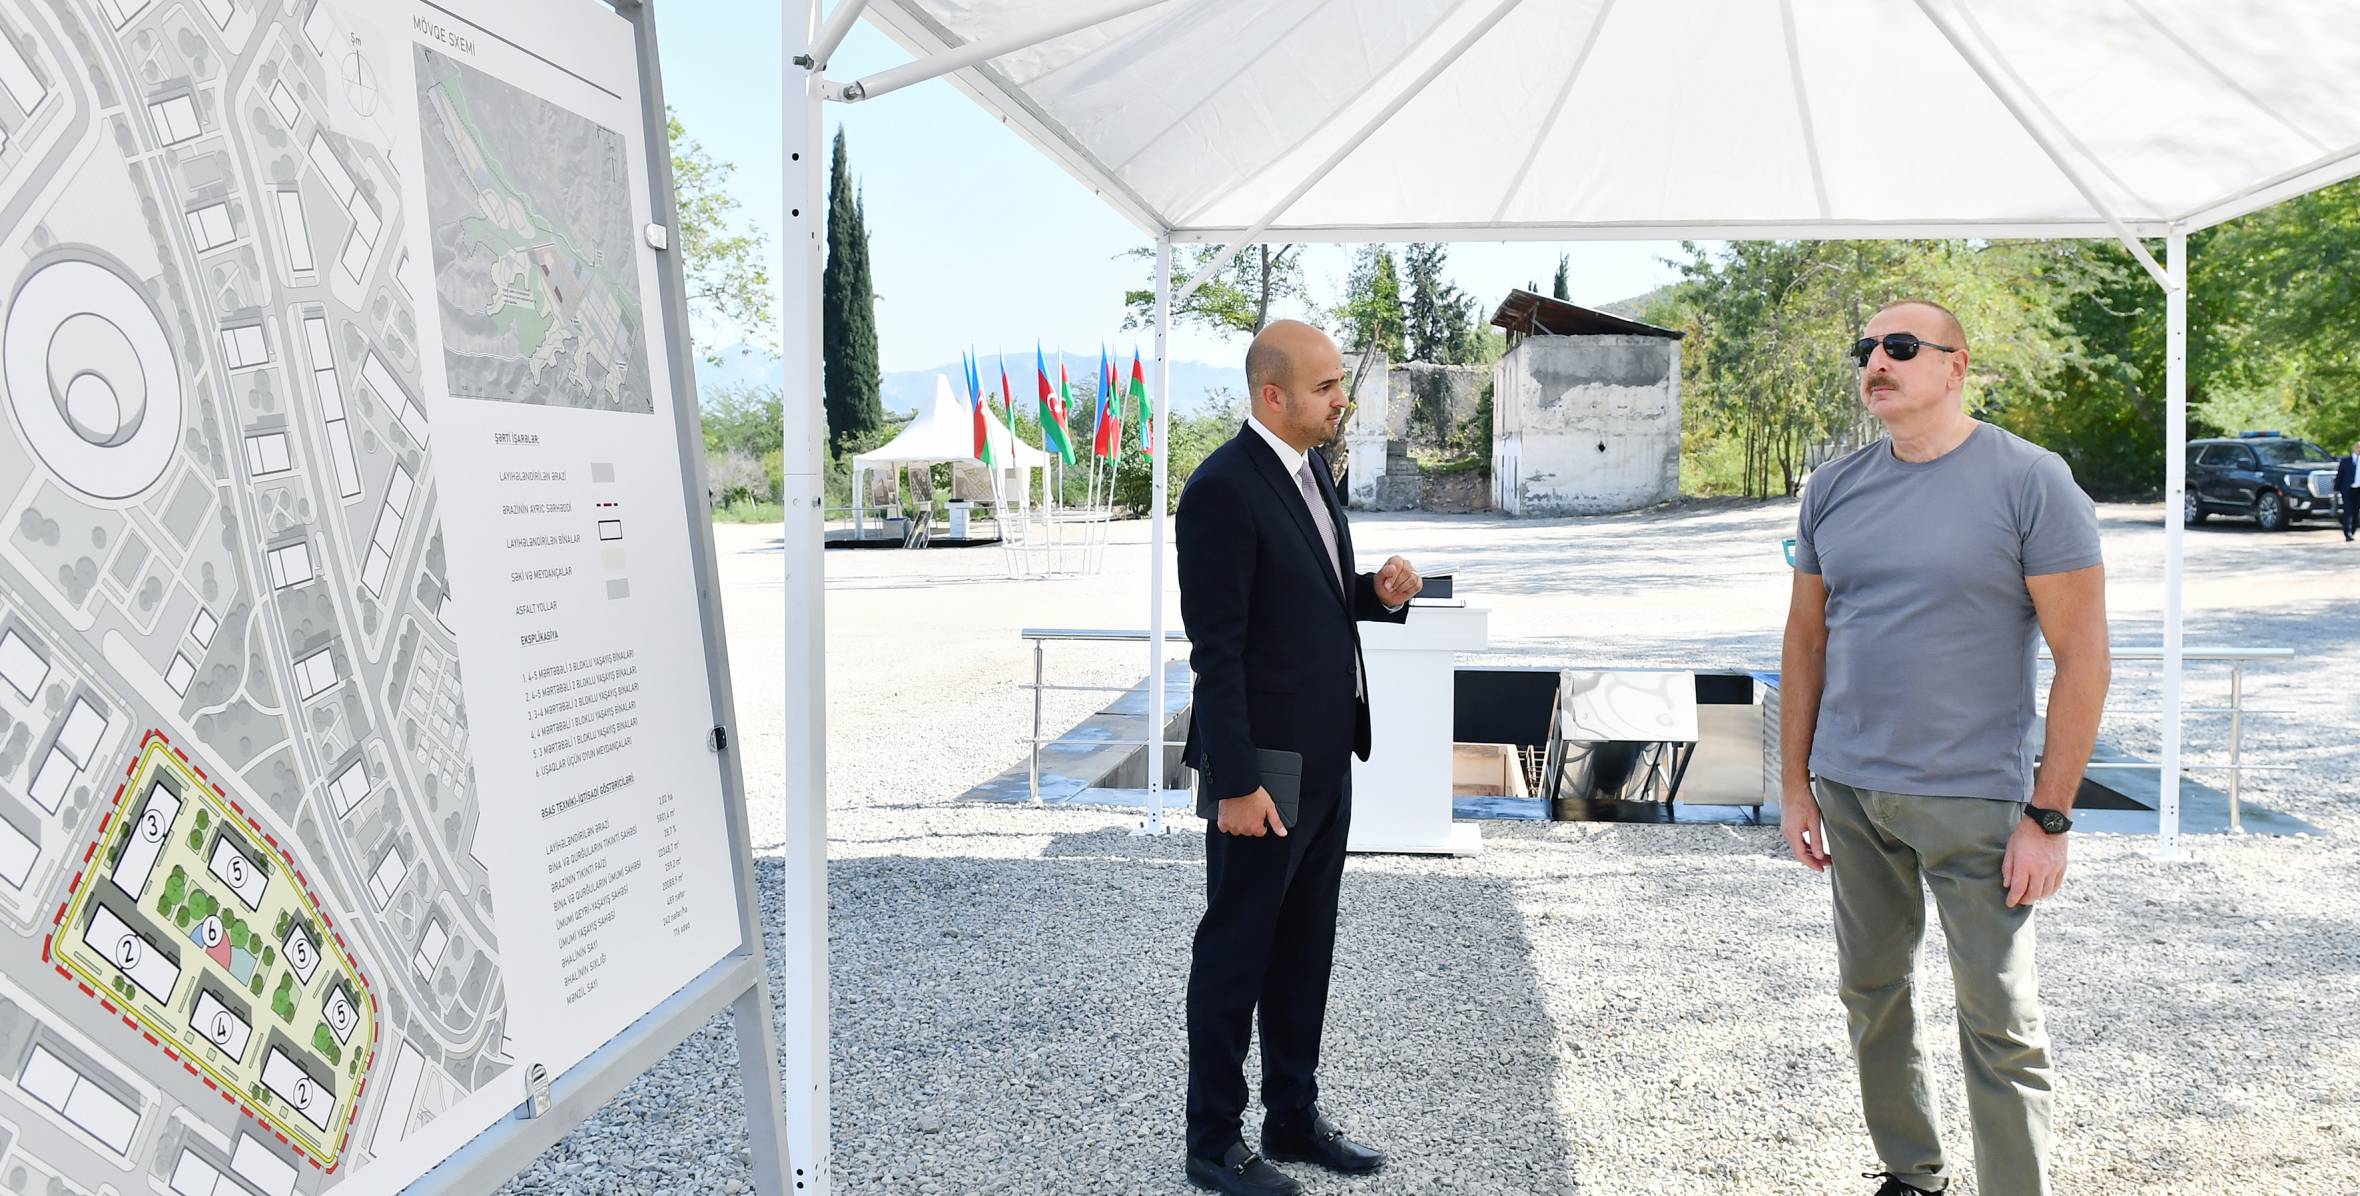 Ilham Aliyev has laid a foundation stone for the 4th residential complex in the city of Zangilan